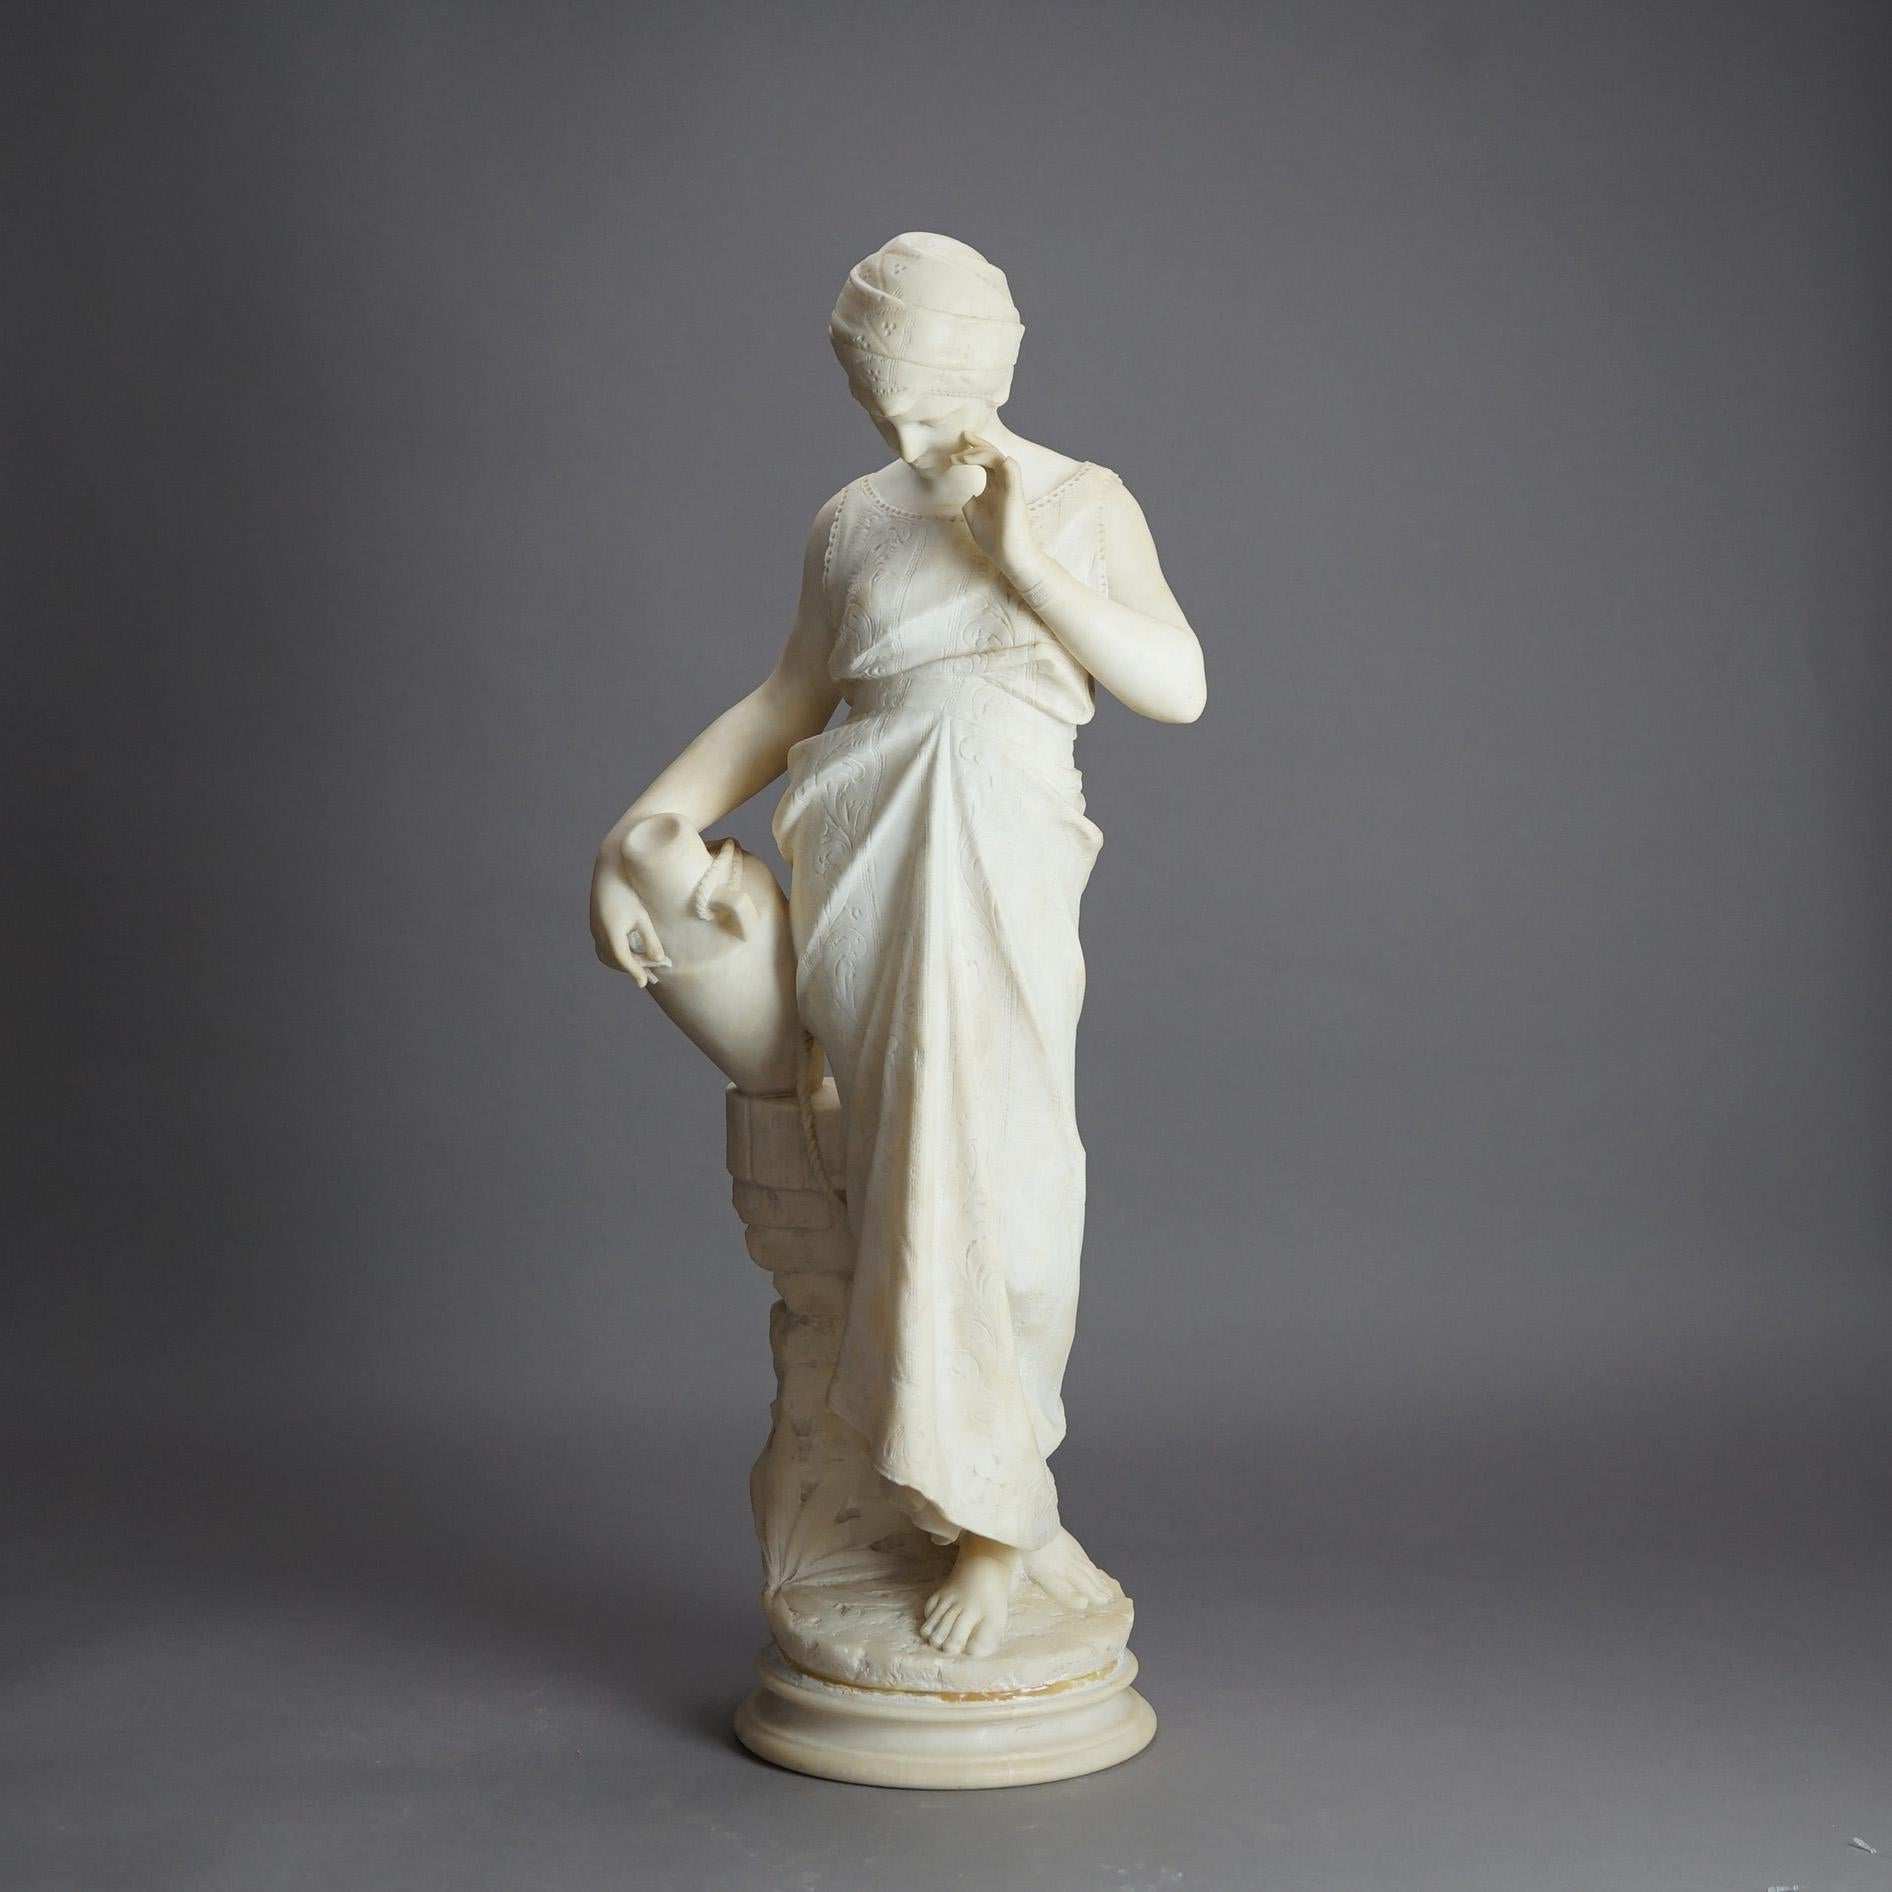 An antique Italian figurative sculpture offers carved alabaster portrait of a Classical woman with a water urn in an outdoor setting, signed F. McPugi, c1880

Measures - 29.75